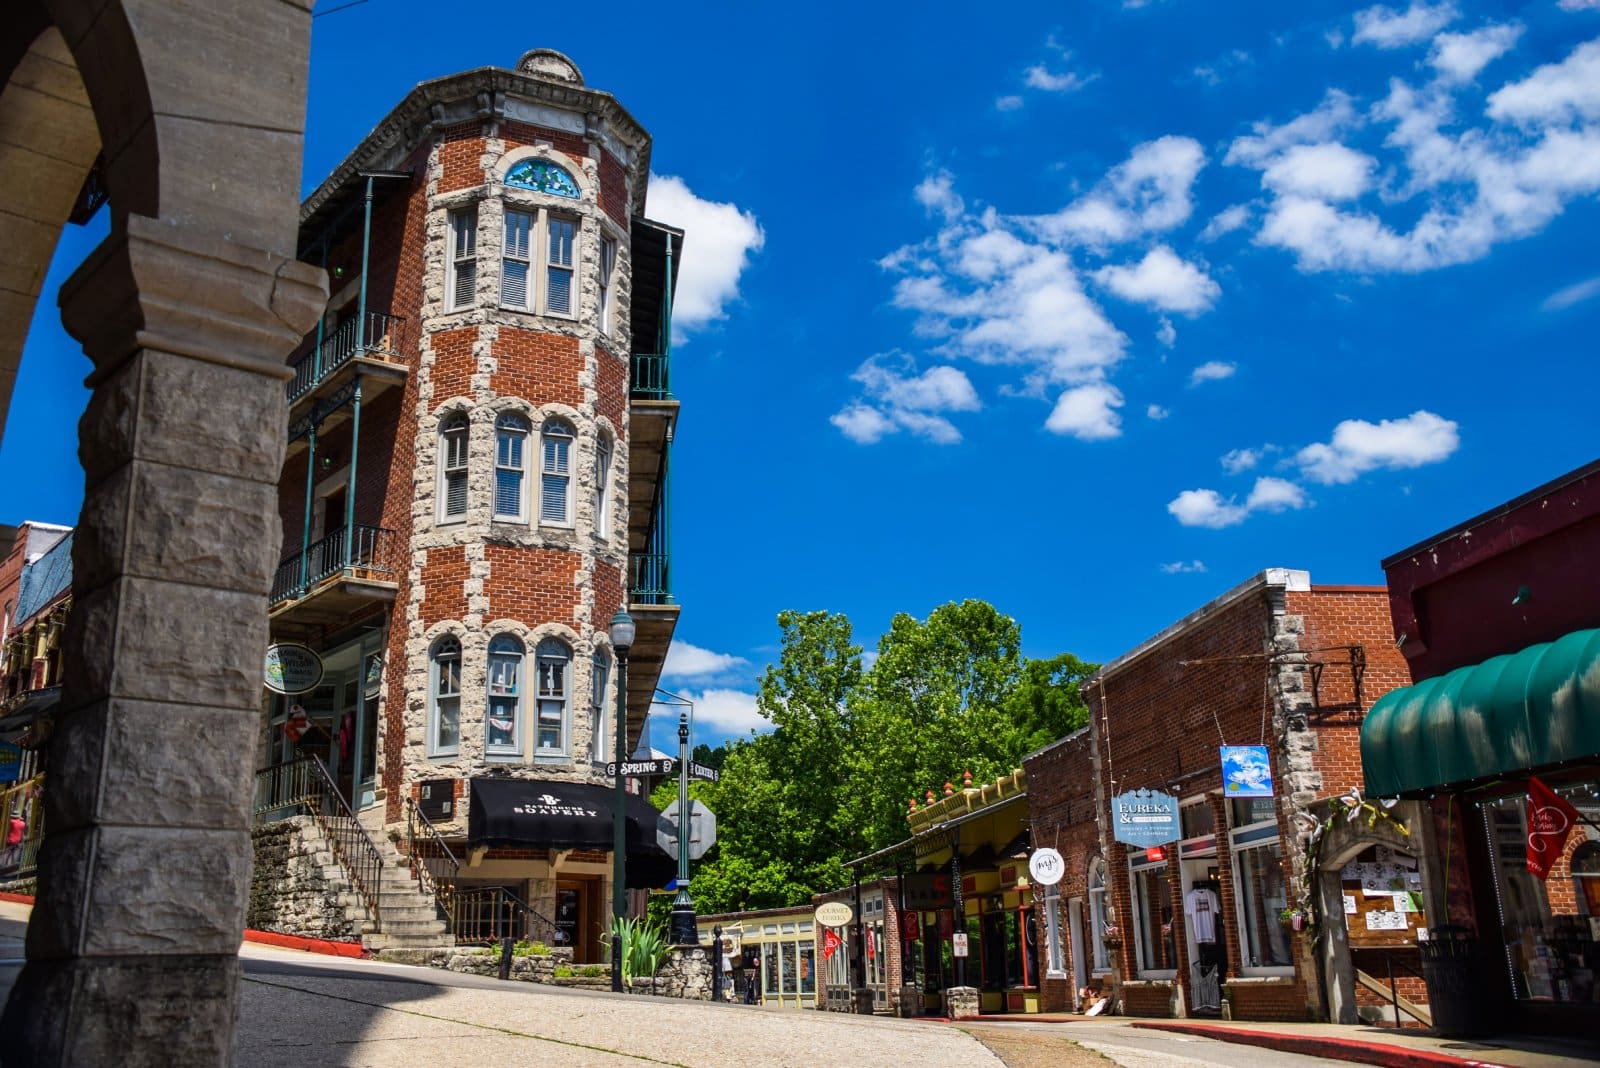 <p class="wp-caption-text">Image Credit: Shutterstock / Rachael Martin</p>  <p><span>Eureka Springs is a historic town in the Ozark Mountains, known for its well-preserved Victorian buildings, winding streets, and natural springs. This charming town offers a unique blend of history, art, and outdoor activities. The Great Passion Play and Thorncrown Chapel are significant attractions, alongside numerous galleries and craft shops. Eureka Springs’ setting provides opportunities for hiking, biking, and exploring the surrounding natural beauty, including Beaver Lake and the Ozark National Forest.</span></p>